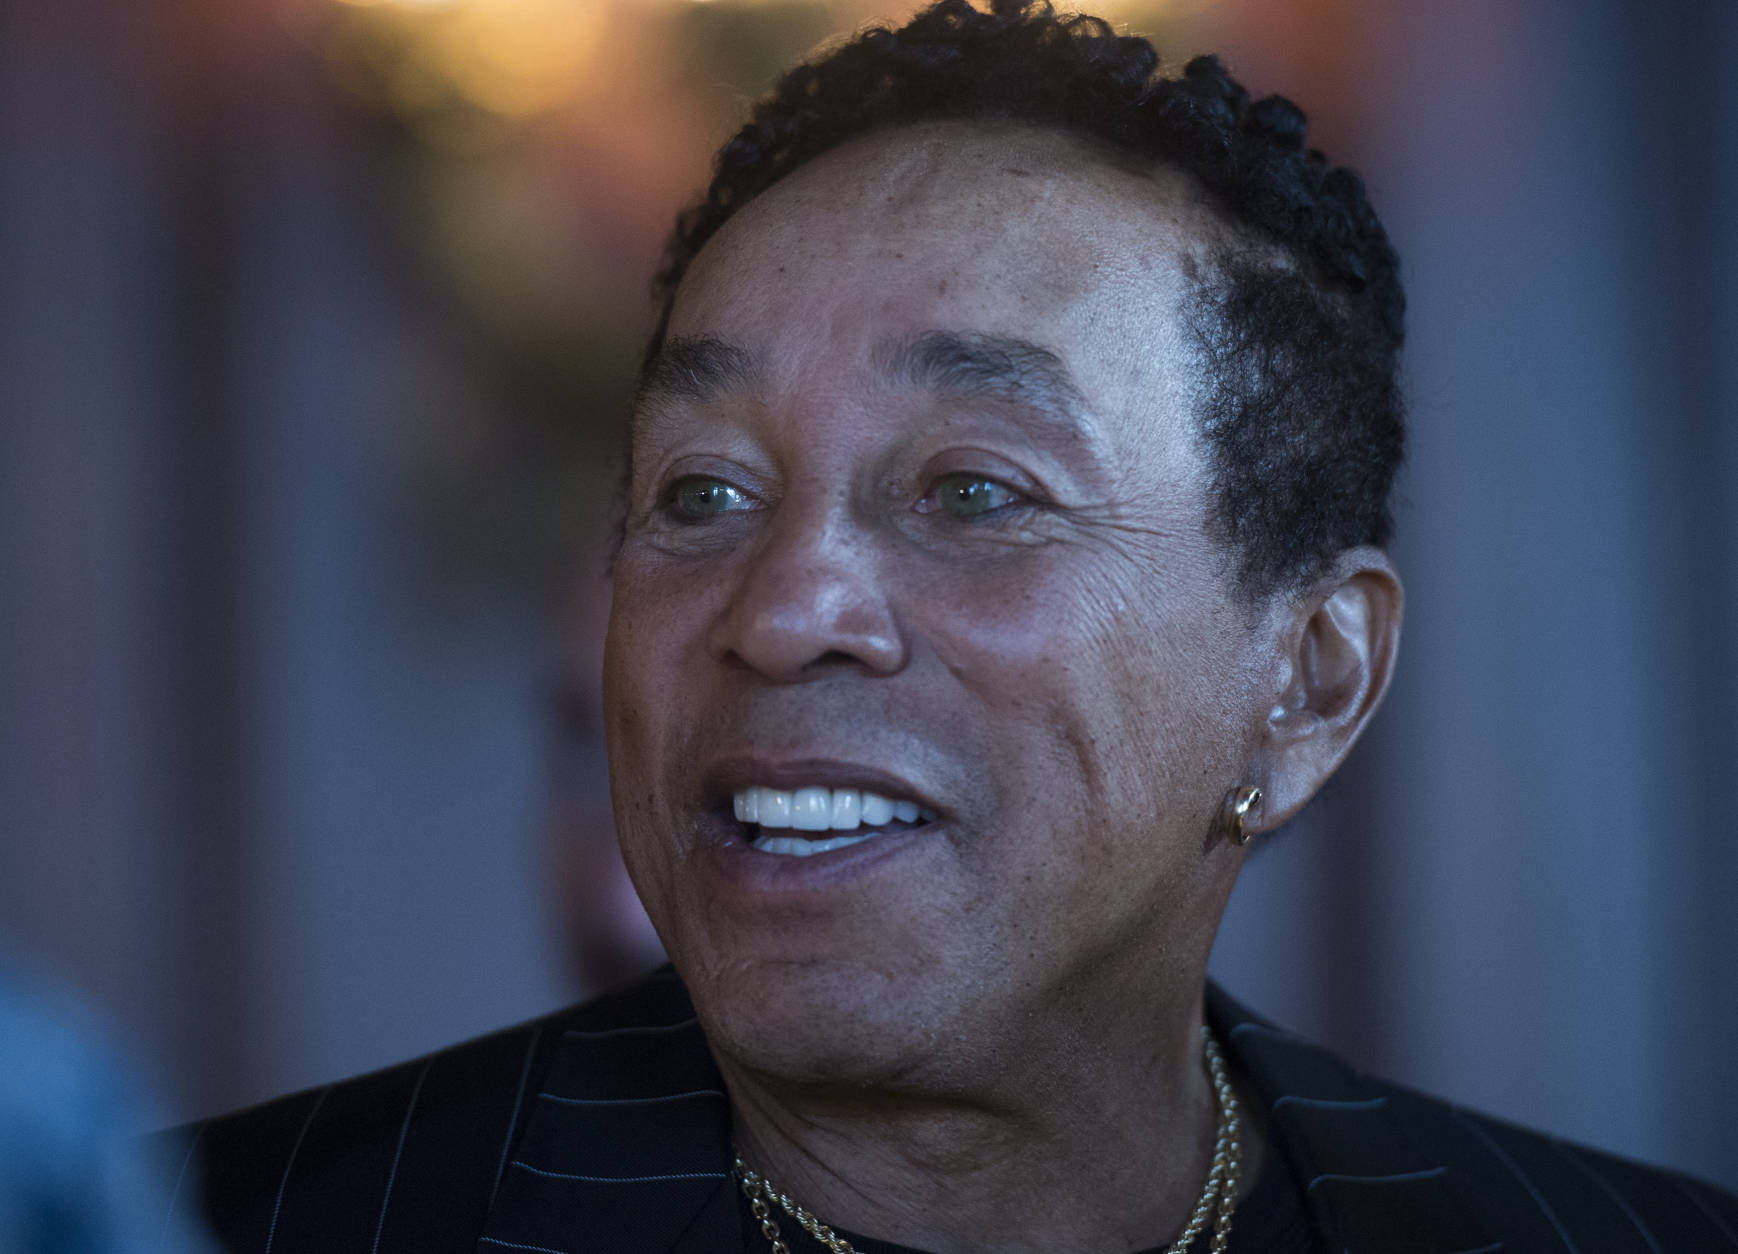 Gershwin Prize recipient Smokey Robinson appears for a special display while visiting the Library of Congress in Washington, Tuesday, Nov. 15, 2016. (AP Photo/Molly Riley)